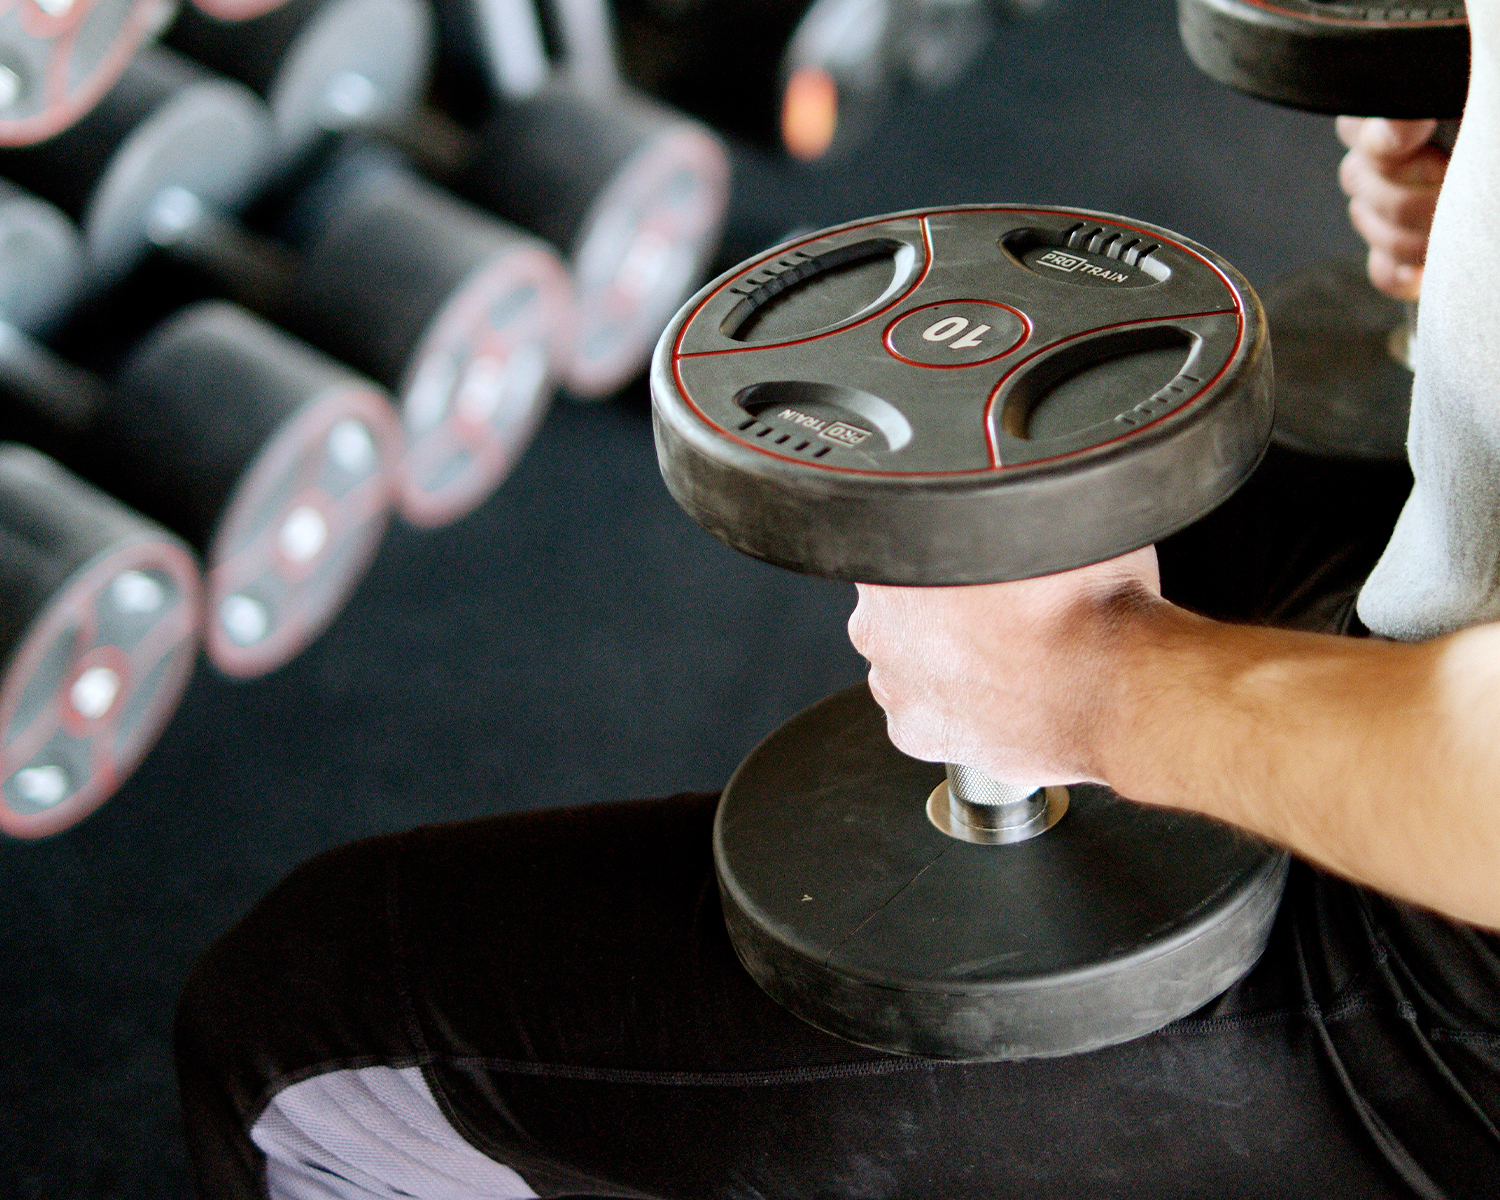 Man at Gym Holding Weights for Exercise